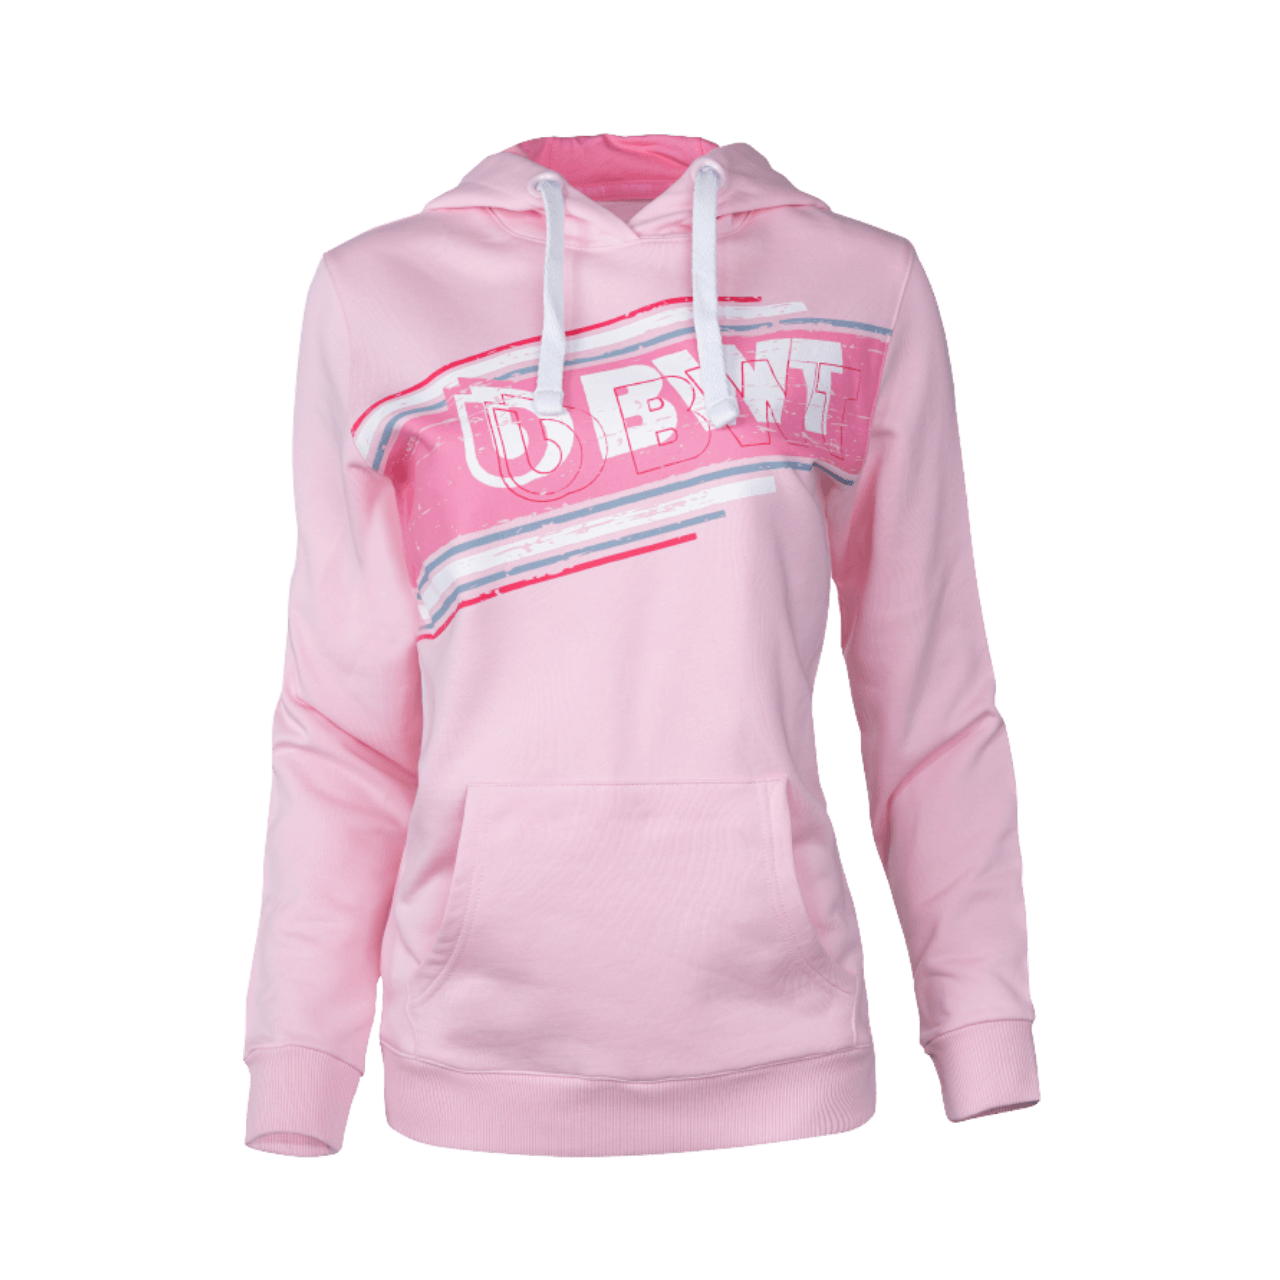 BWT Lifestyle Hoodie Ladies pink with white BWT logo on pink background on the chest